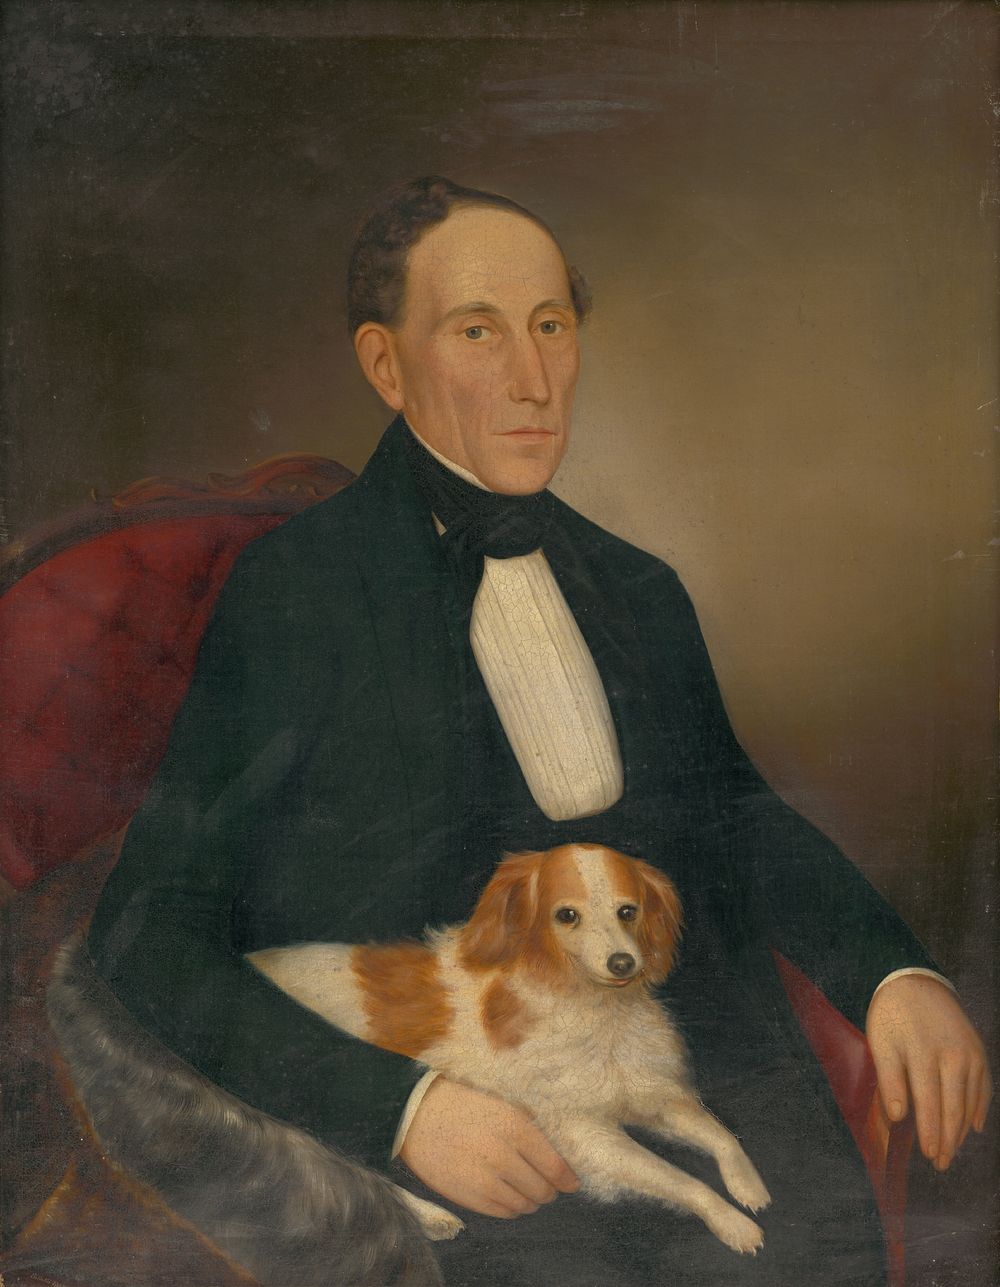 Portrait of a seated man with a dog by Palinka